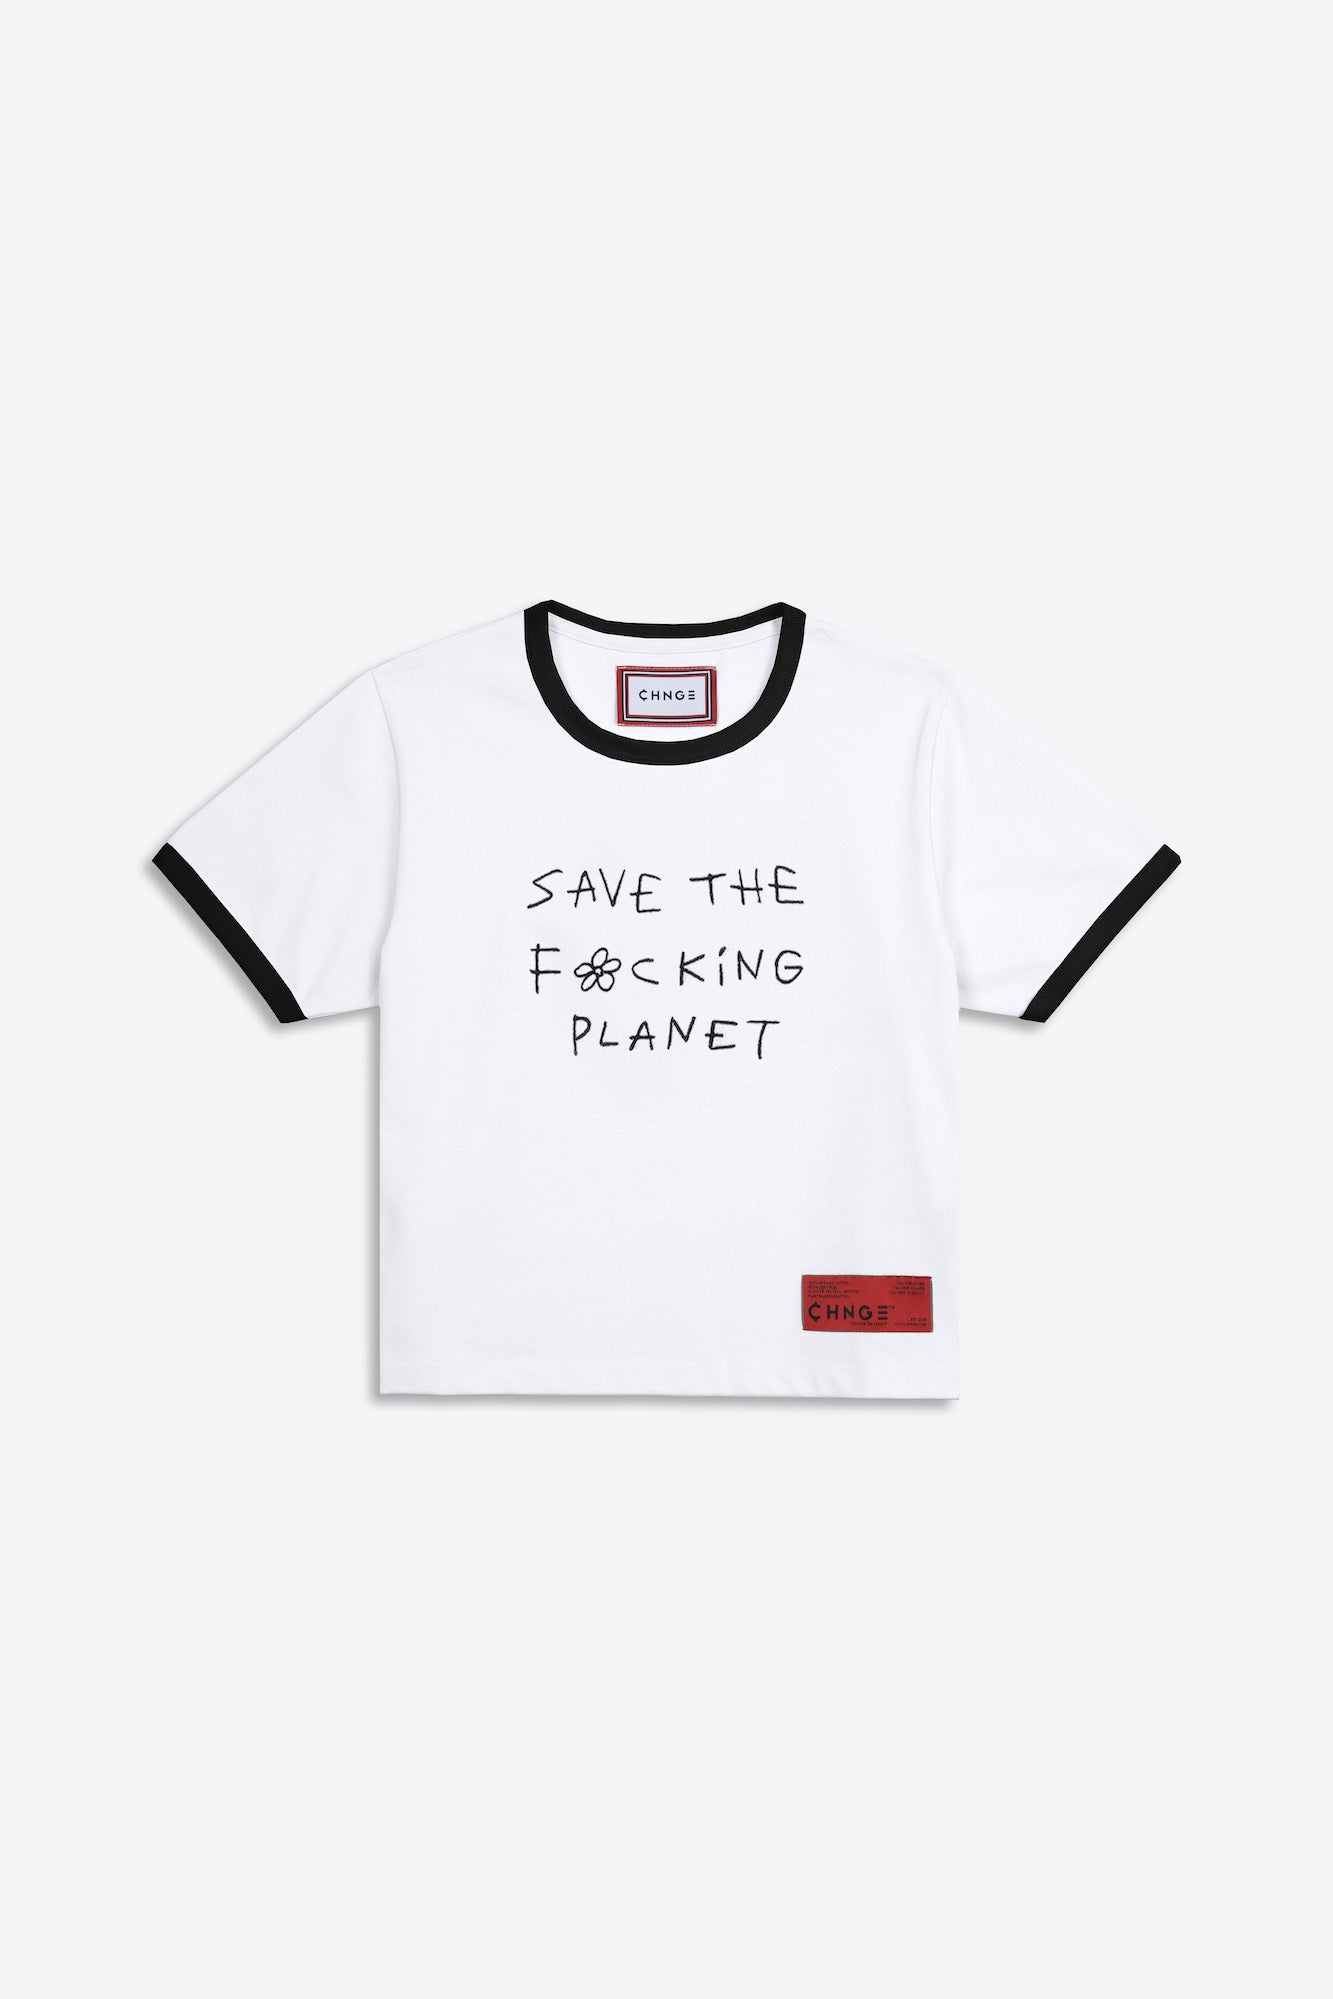 In search of this baby tee. Please help, thank you!! : r/findfashion